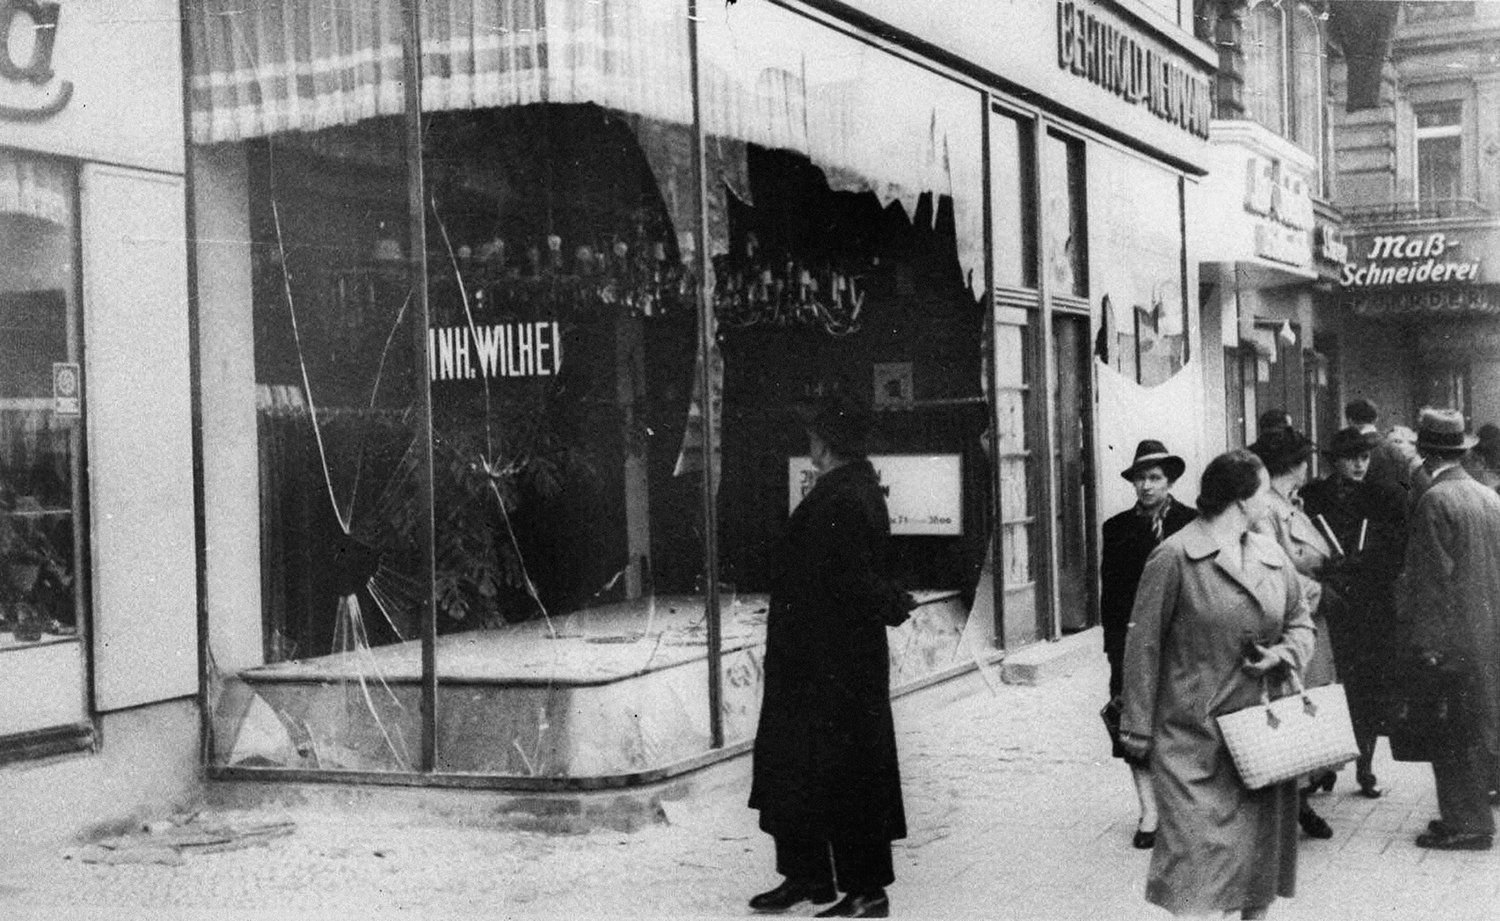 A Jewish-owned shop in Berlin on Nov. 10, 1938, in the aftermath of Kristallnacht.